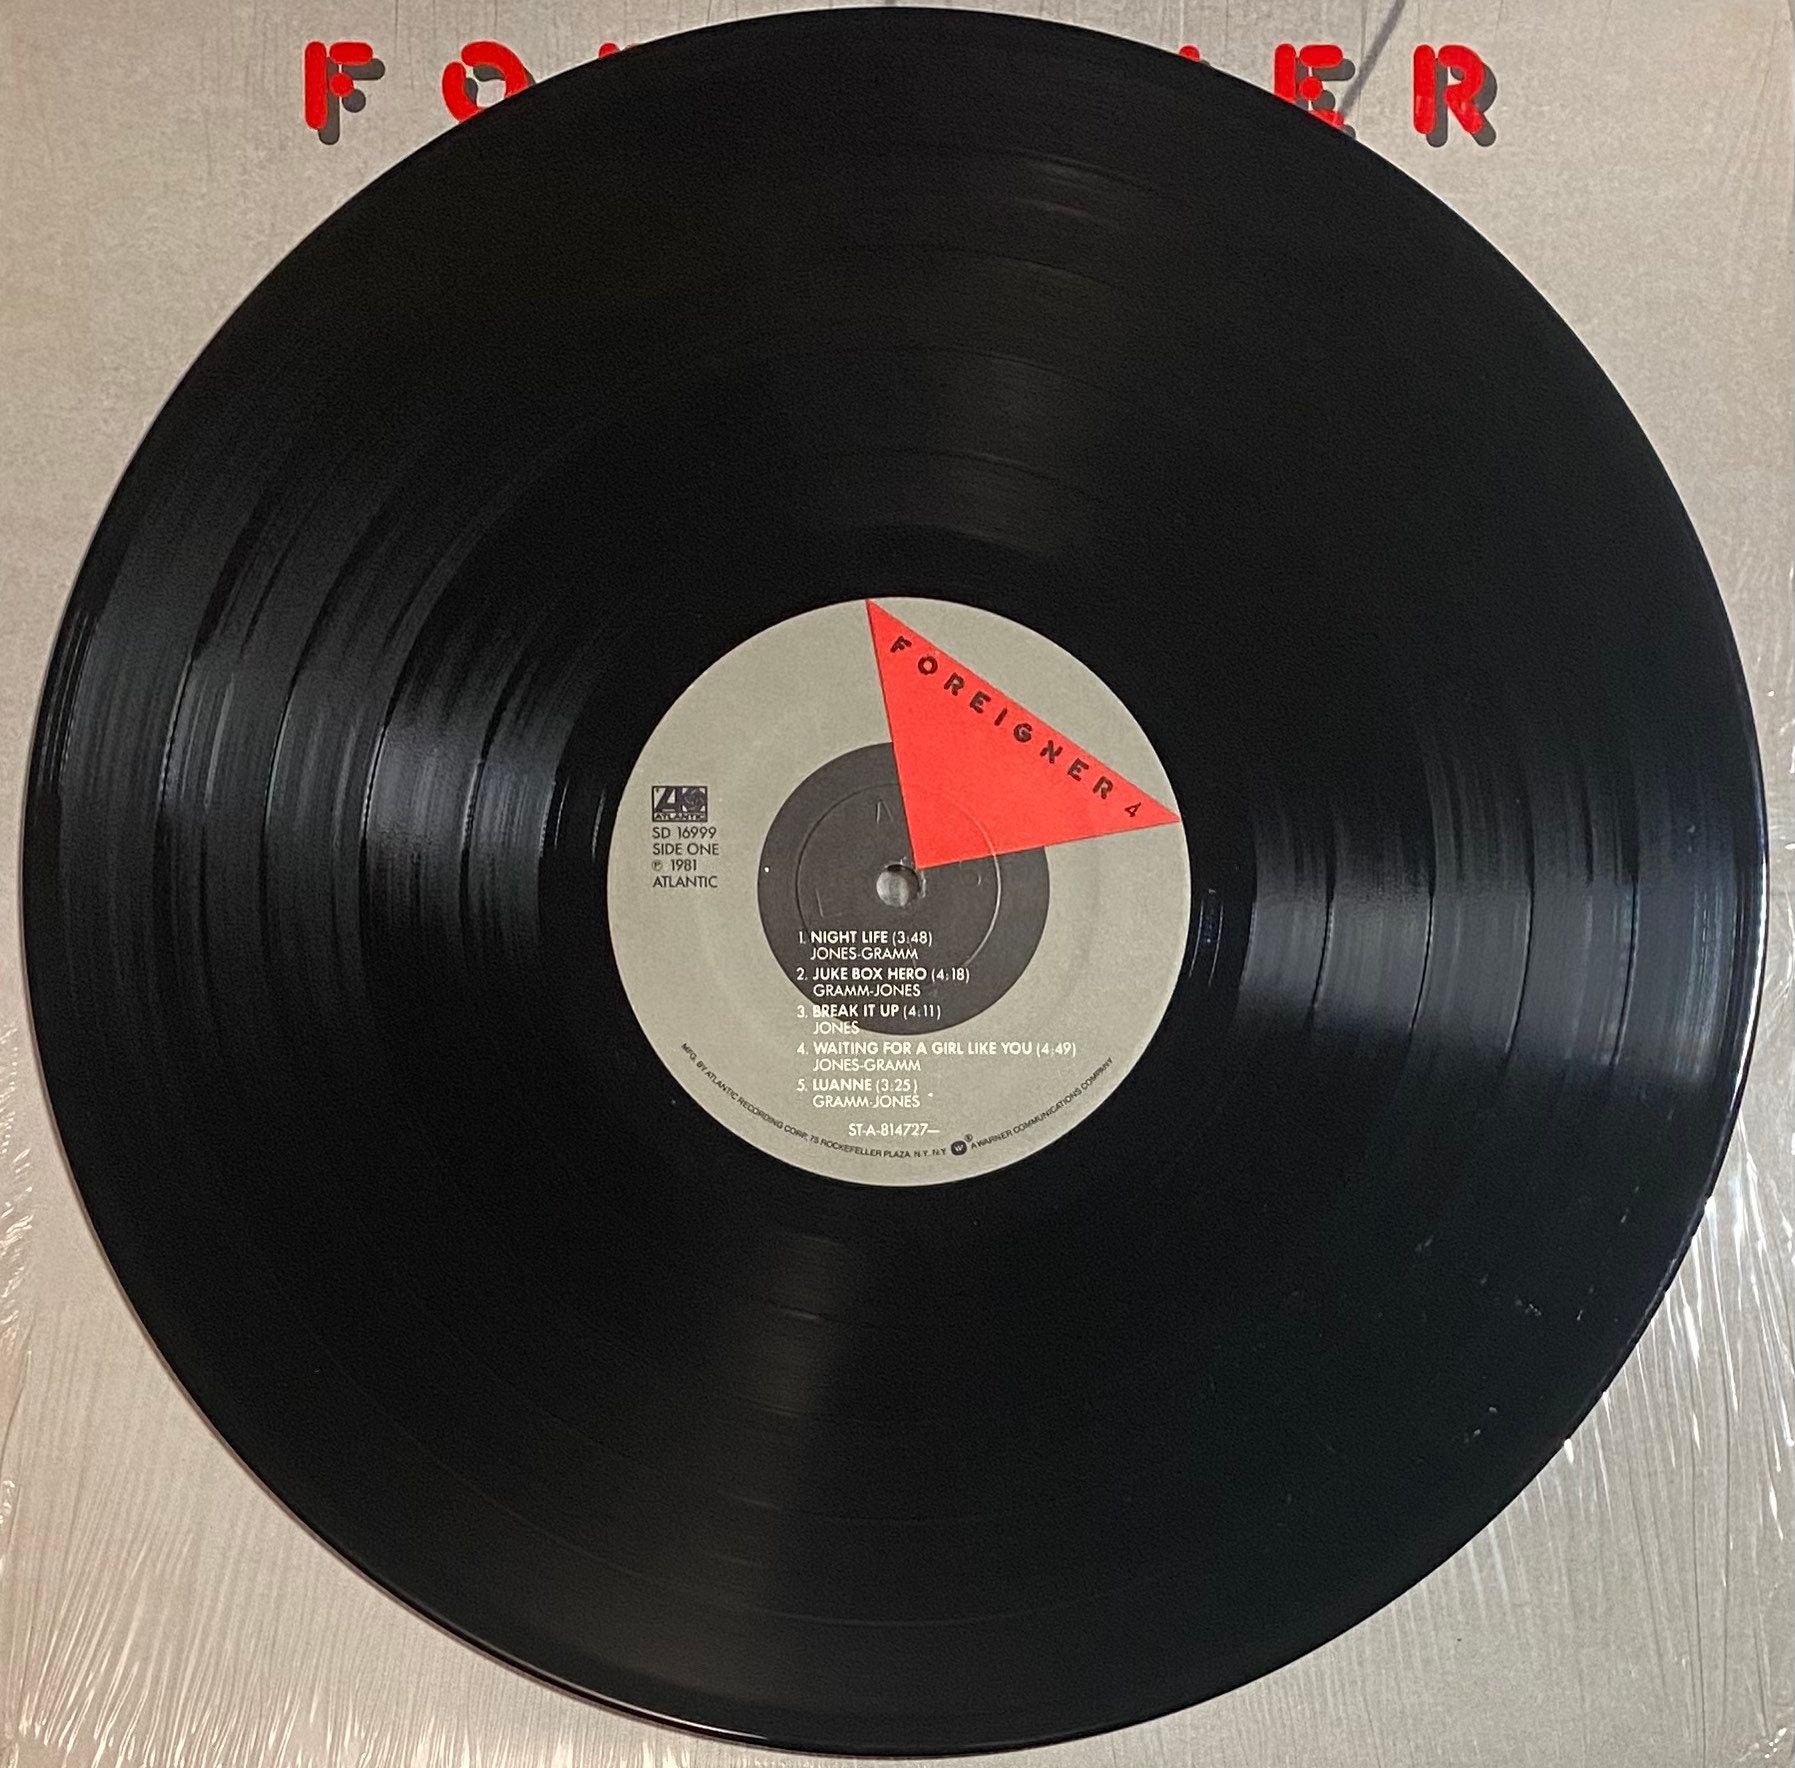 Foreigner / 4 Vinyl LP Record Album in Shrink With Hype - Etsy